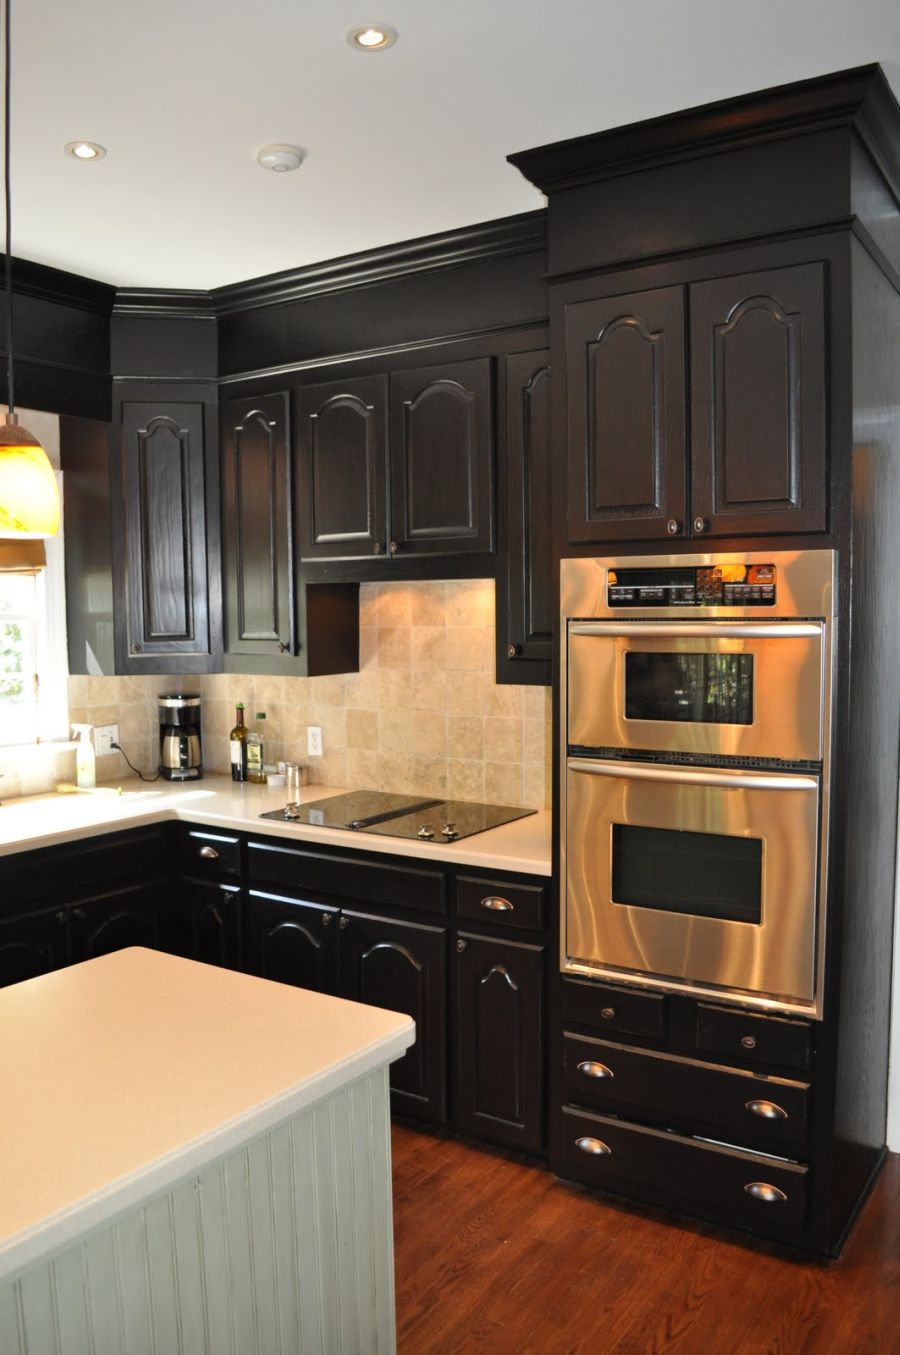 Facts to know about black kitchen cabinet